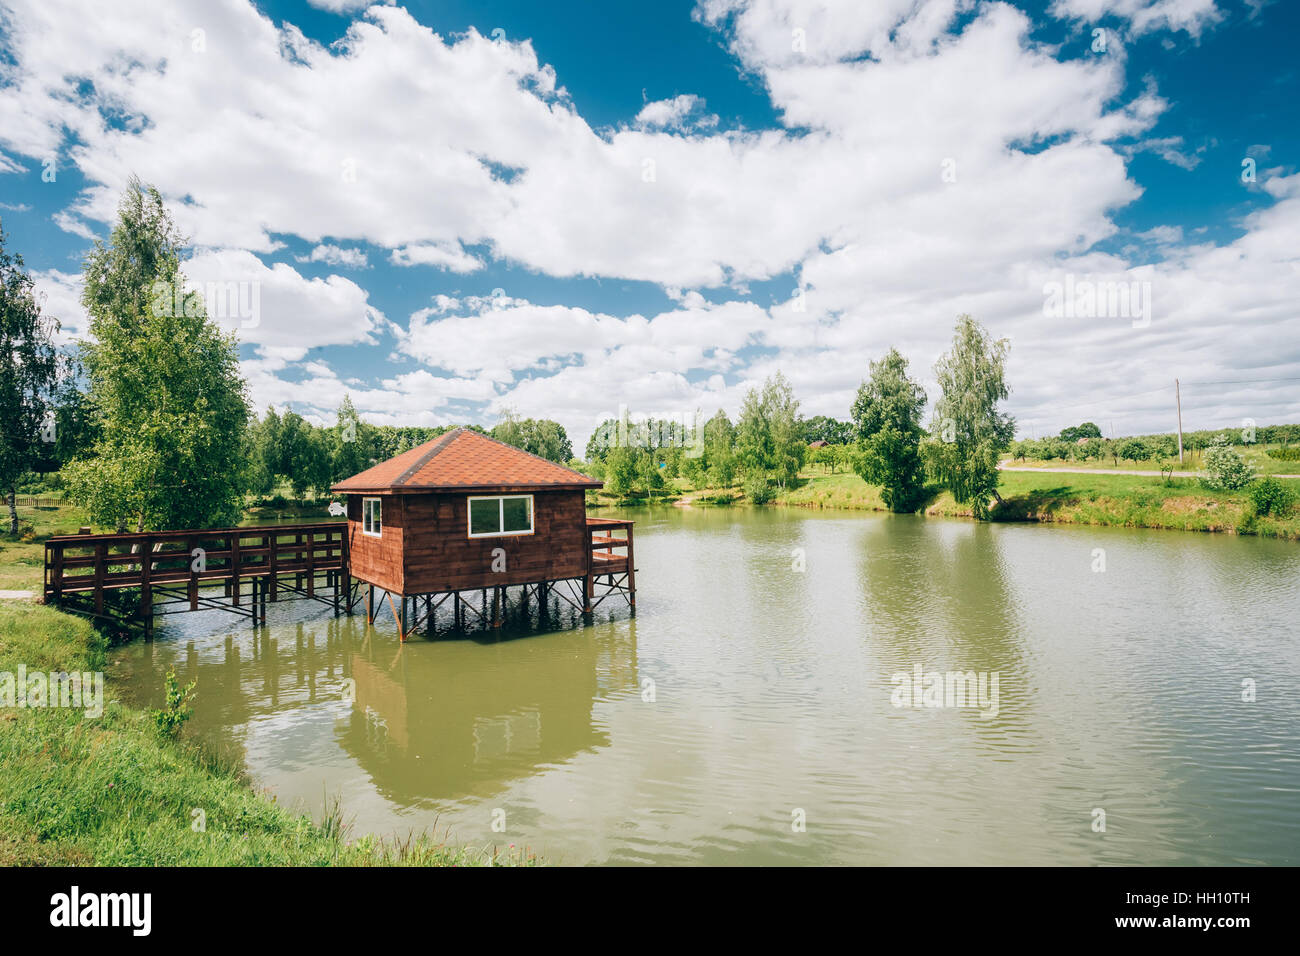 Wooden Pier For Fishing, Small House Shed And Beautiful Lake Or River In  Background. Picturesque Stock Photo by Great_bru